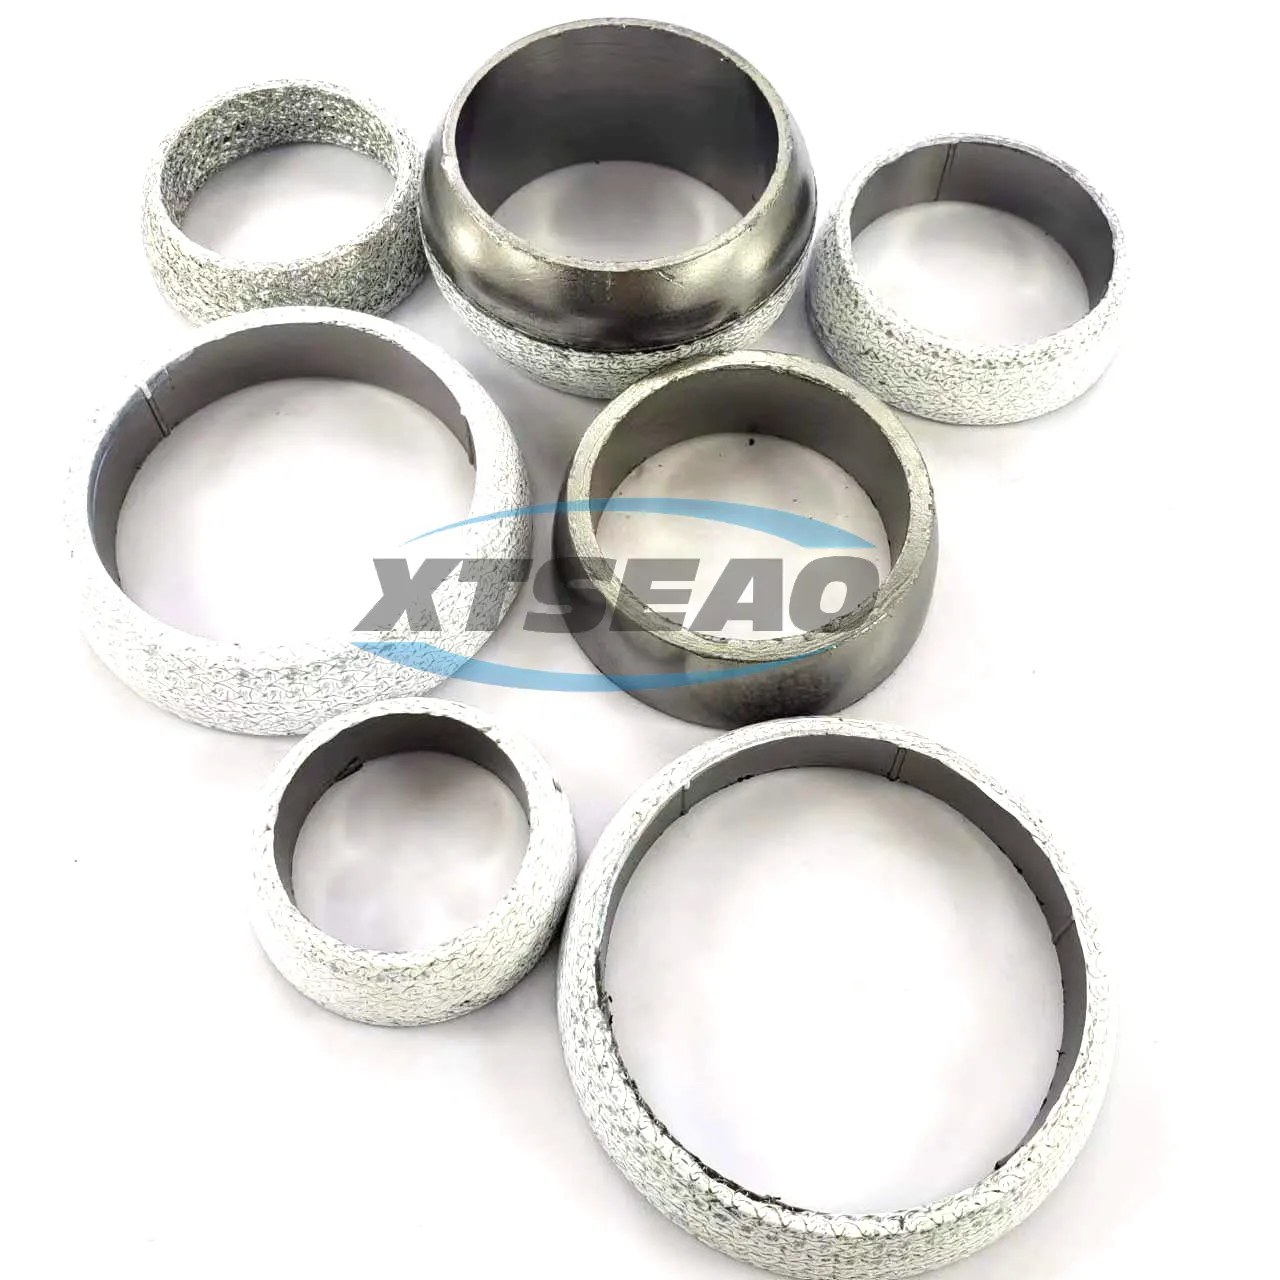 XTSEAO manufacturer sealings Exhaust pipe gasket for car truck motorcycle Graphite muffler gaskets